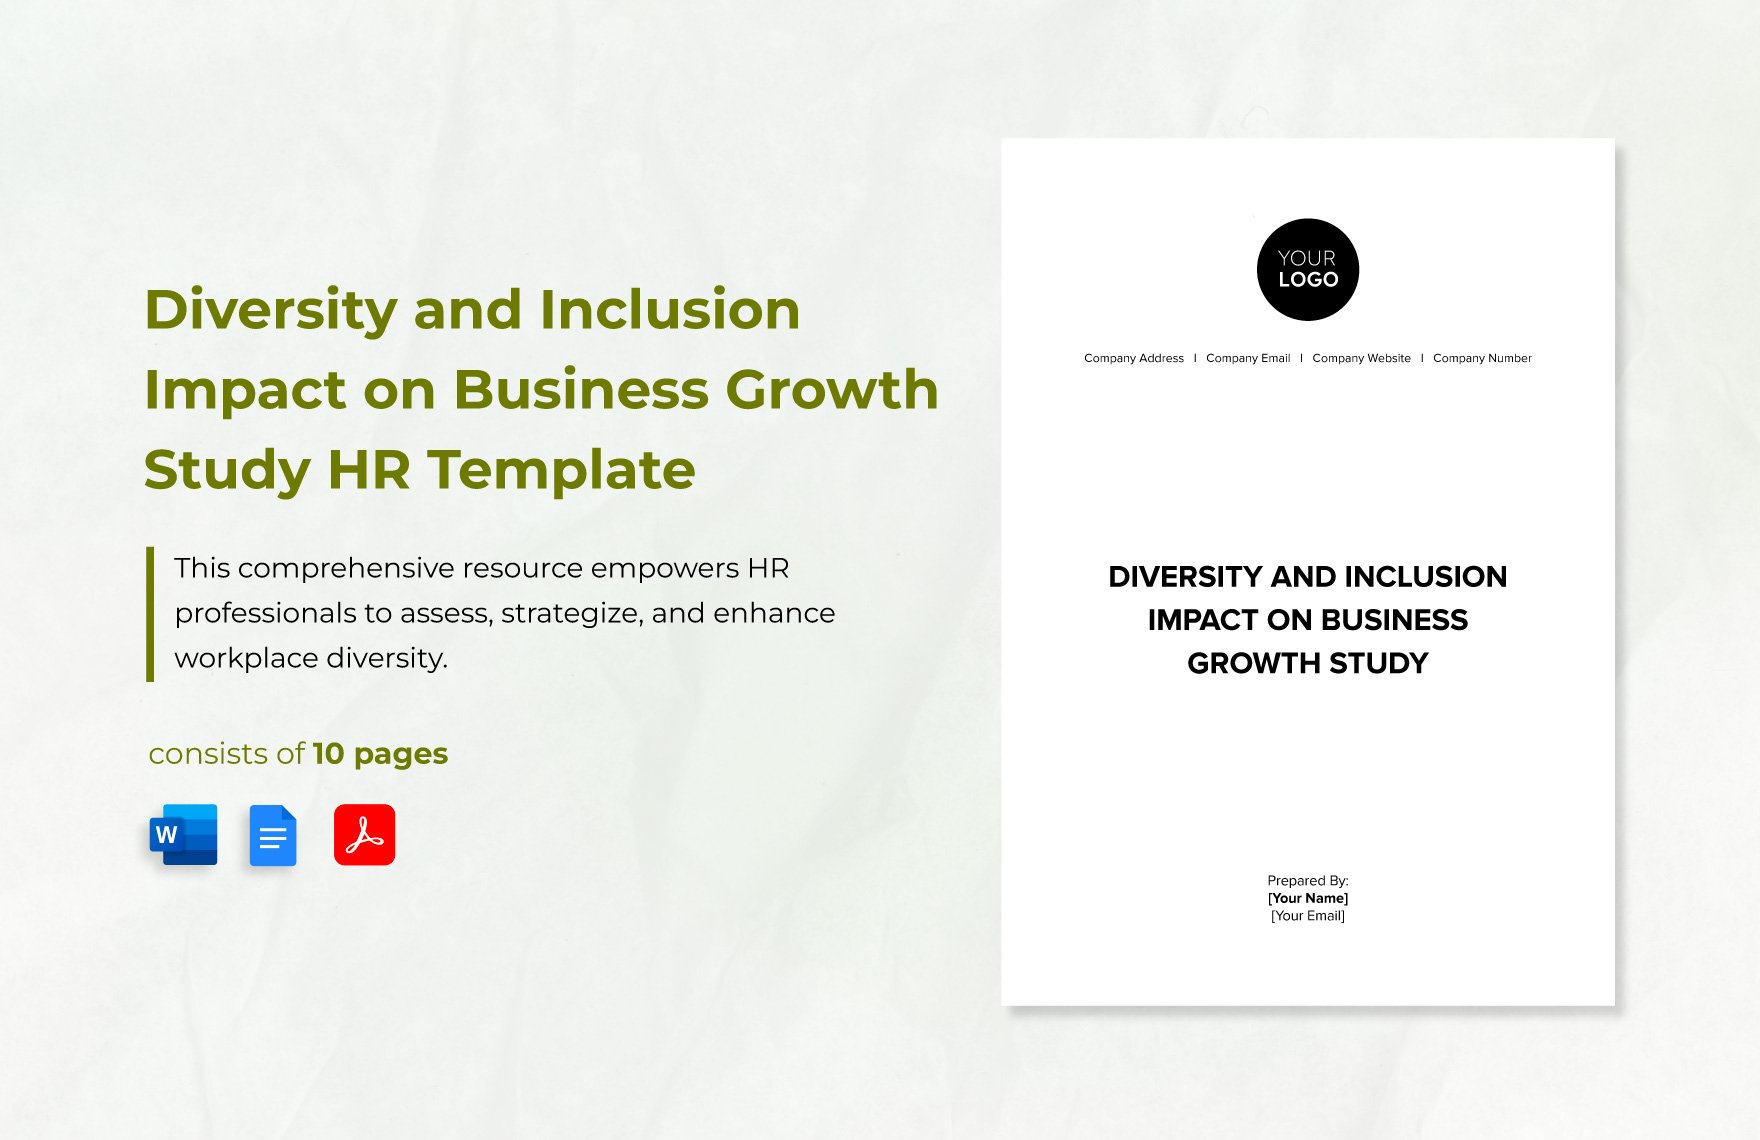 Diversity and Inclusion Impact on Business Growth Study HR Template